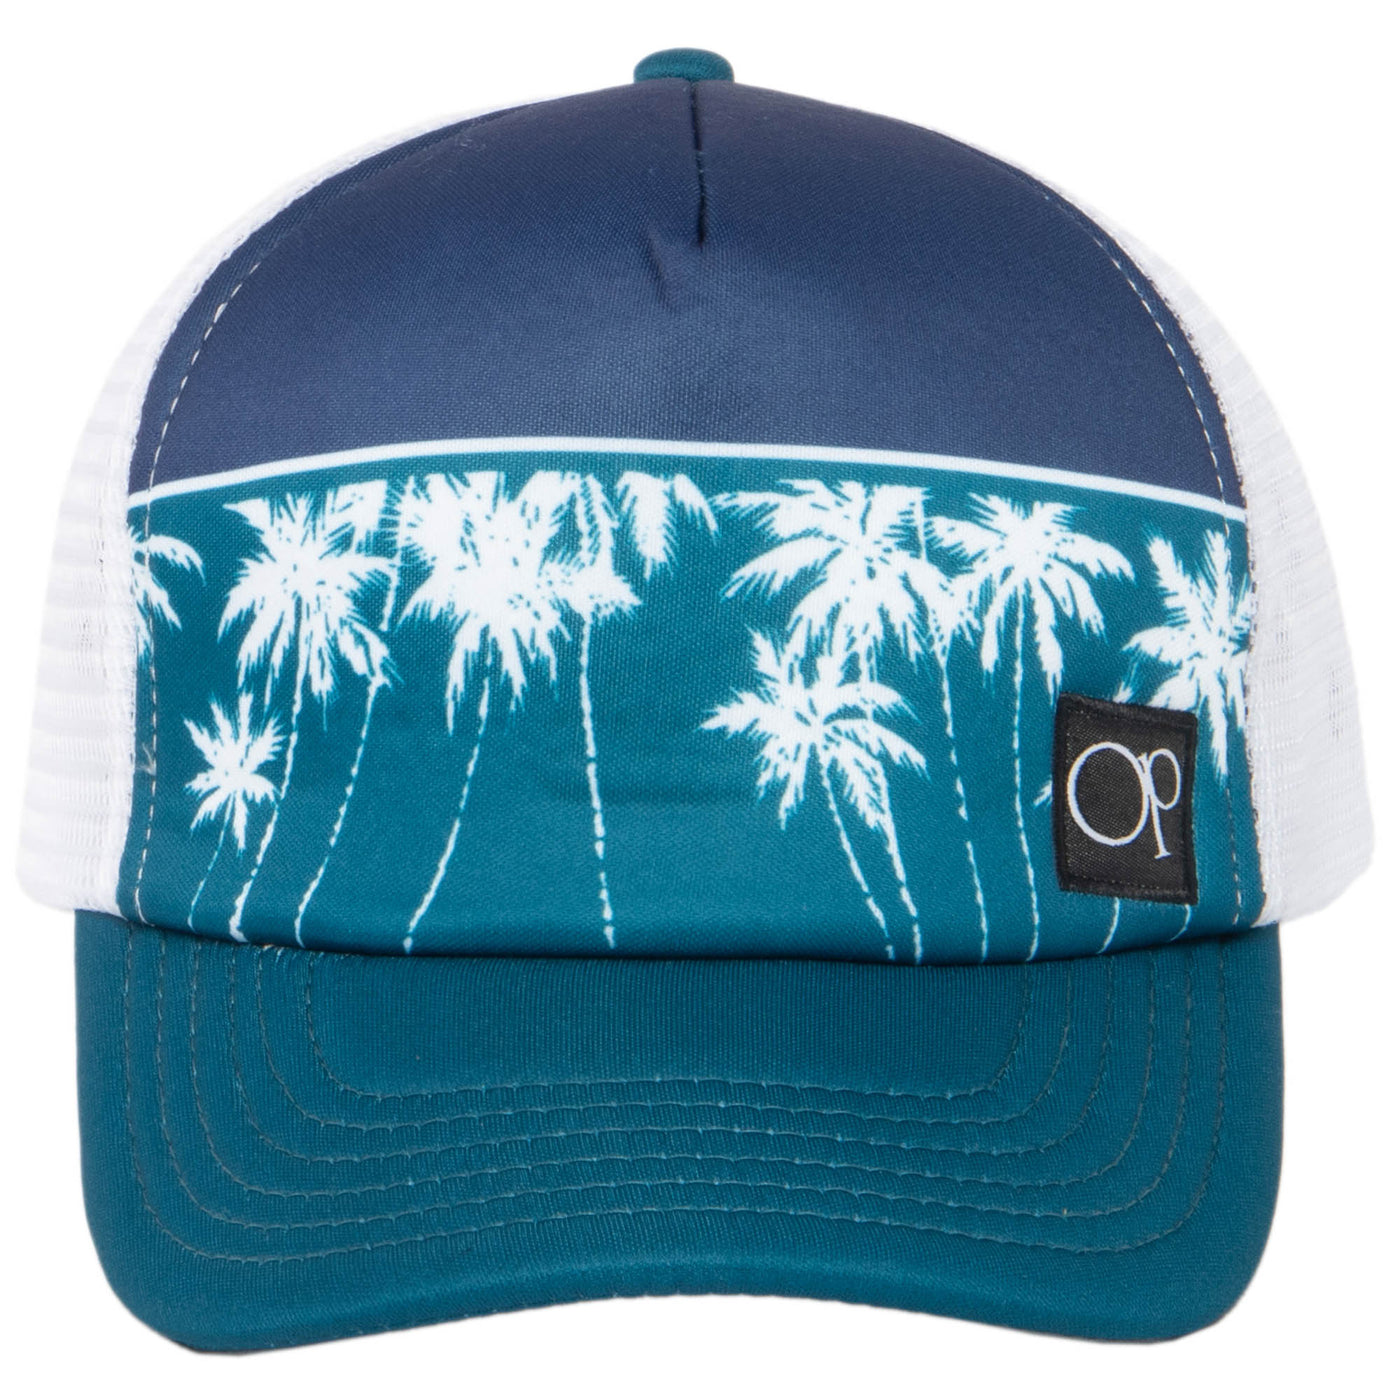 Ocean Pacific - 5 Panel Trucker Hat with White Palm Tree Print-Trucker-San Diego Hat Company